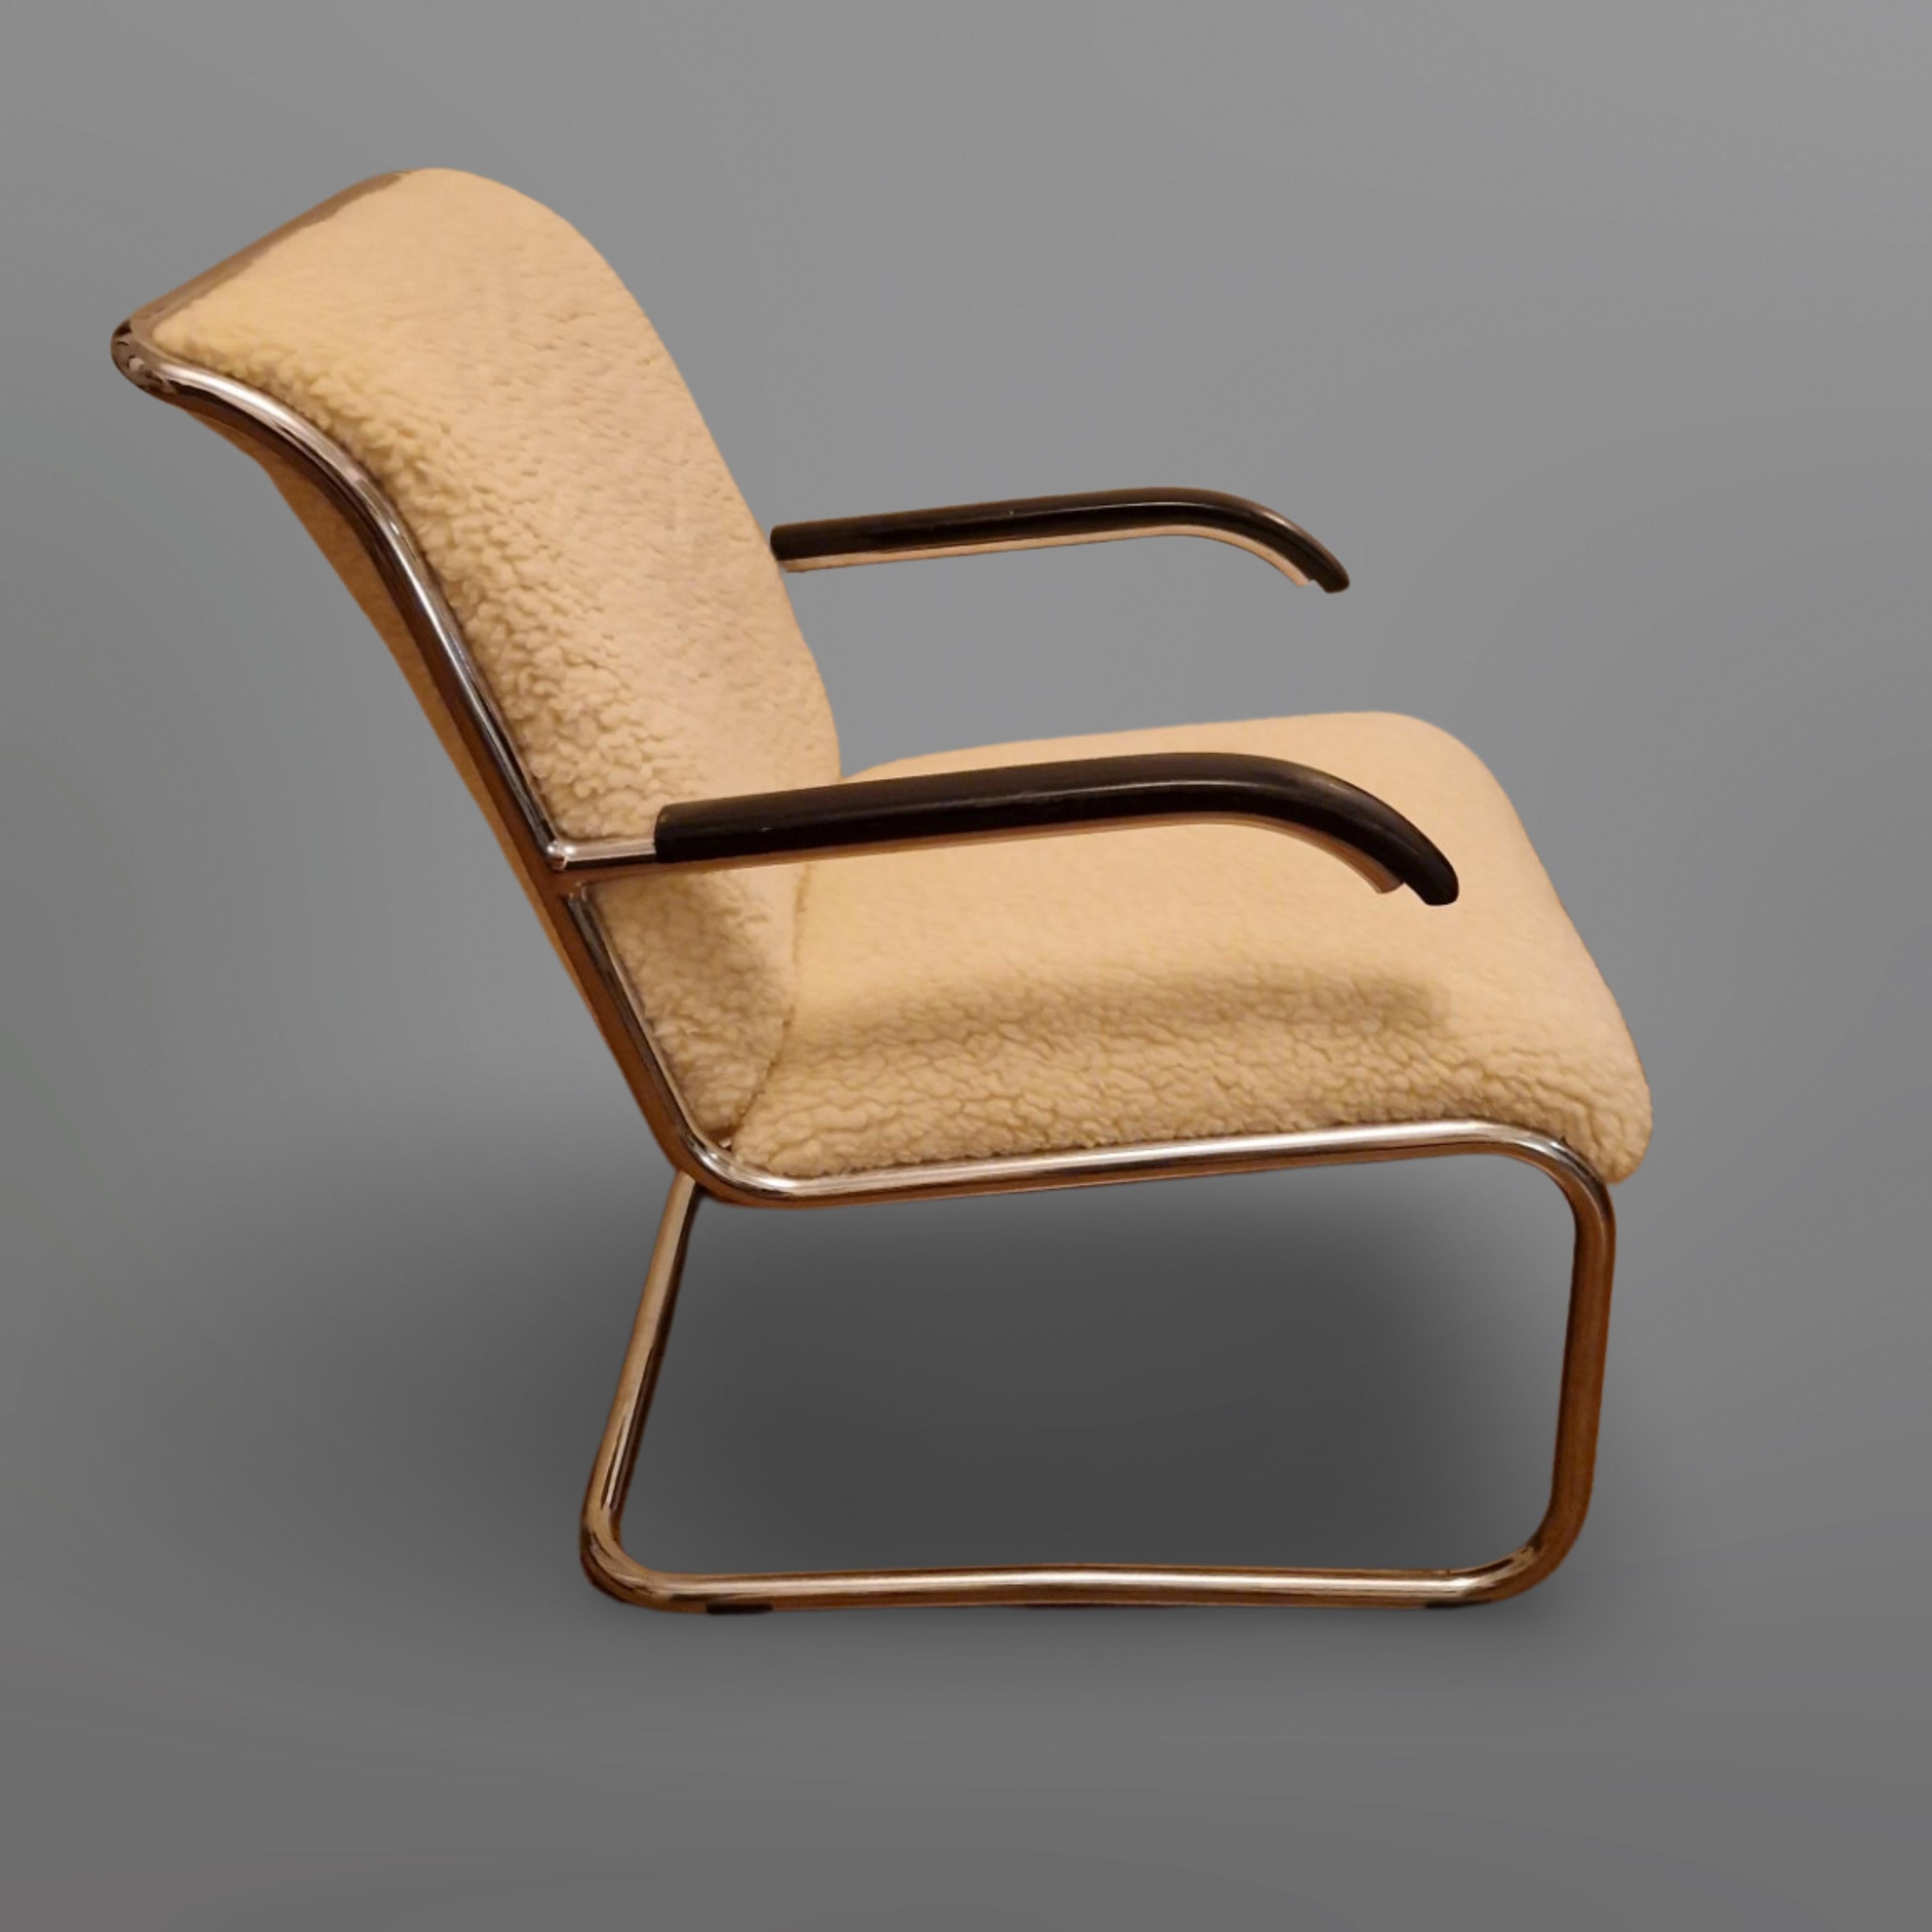 Metal Bauhaus lounge chair with wool teddy upholstery, Netherlands 1930s